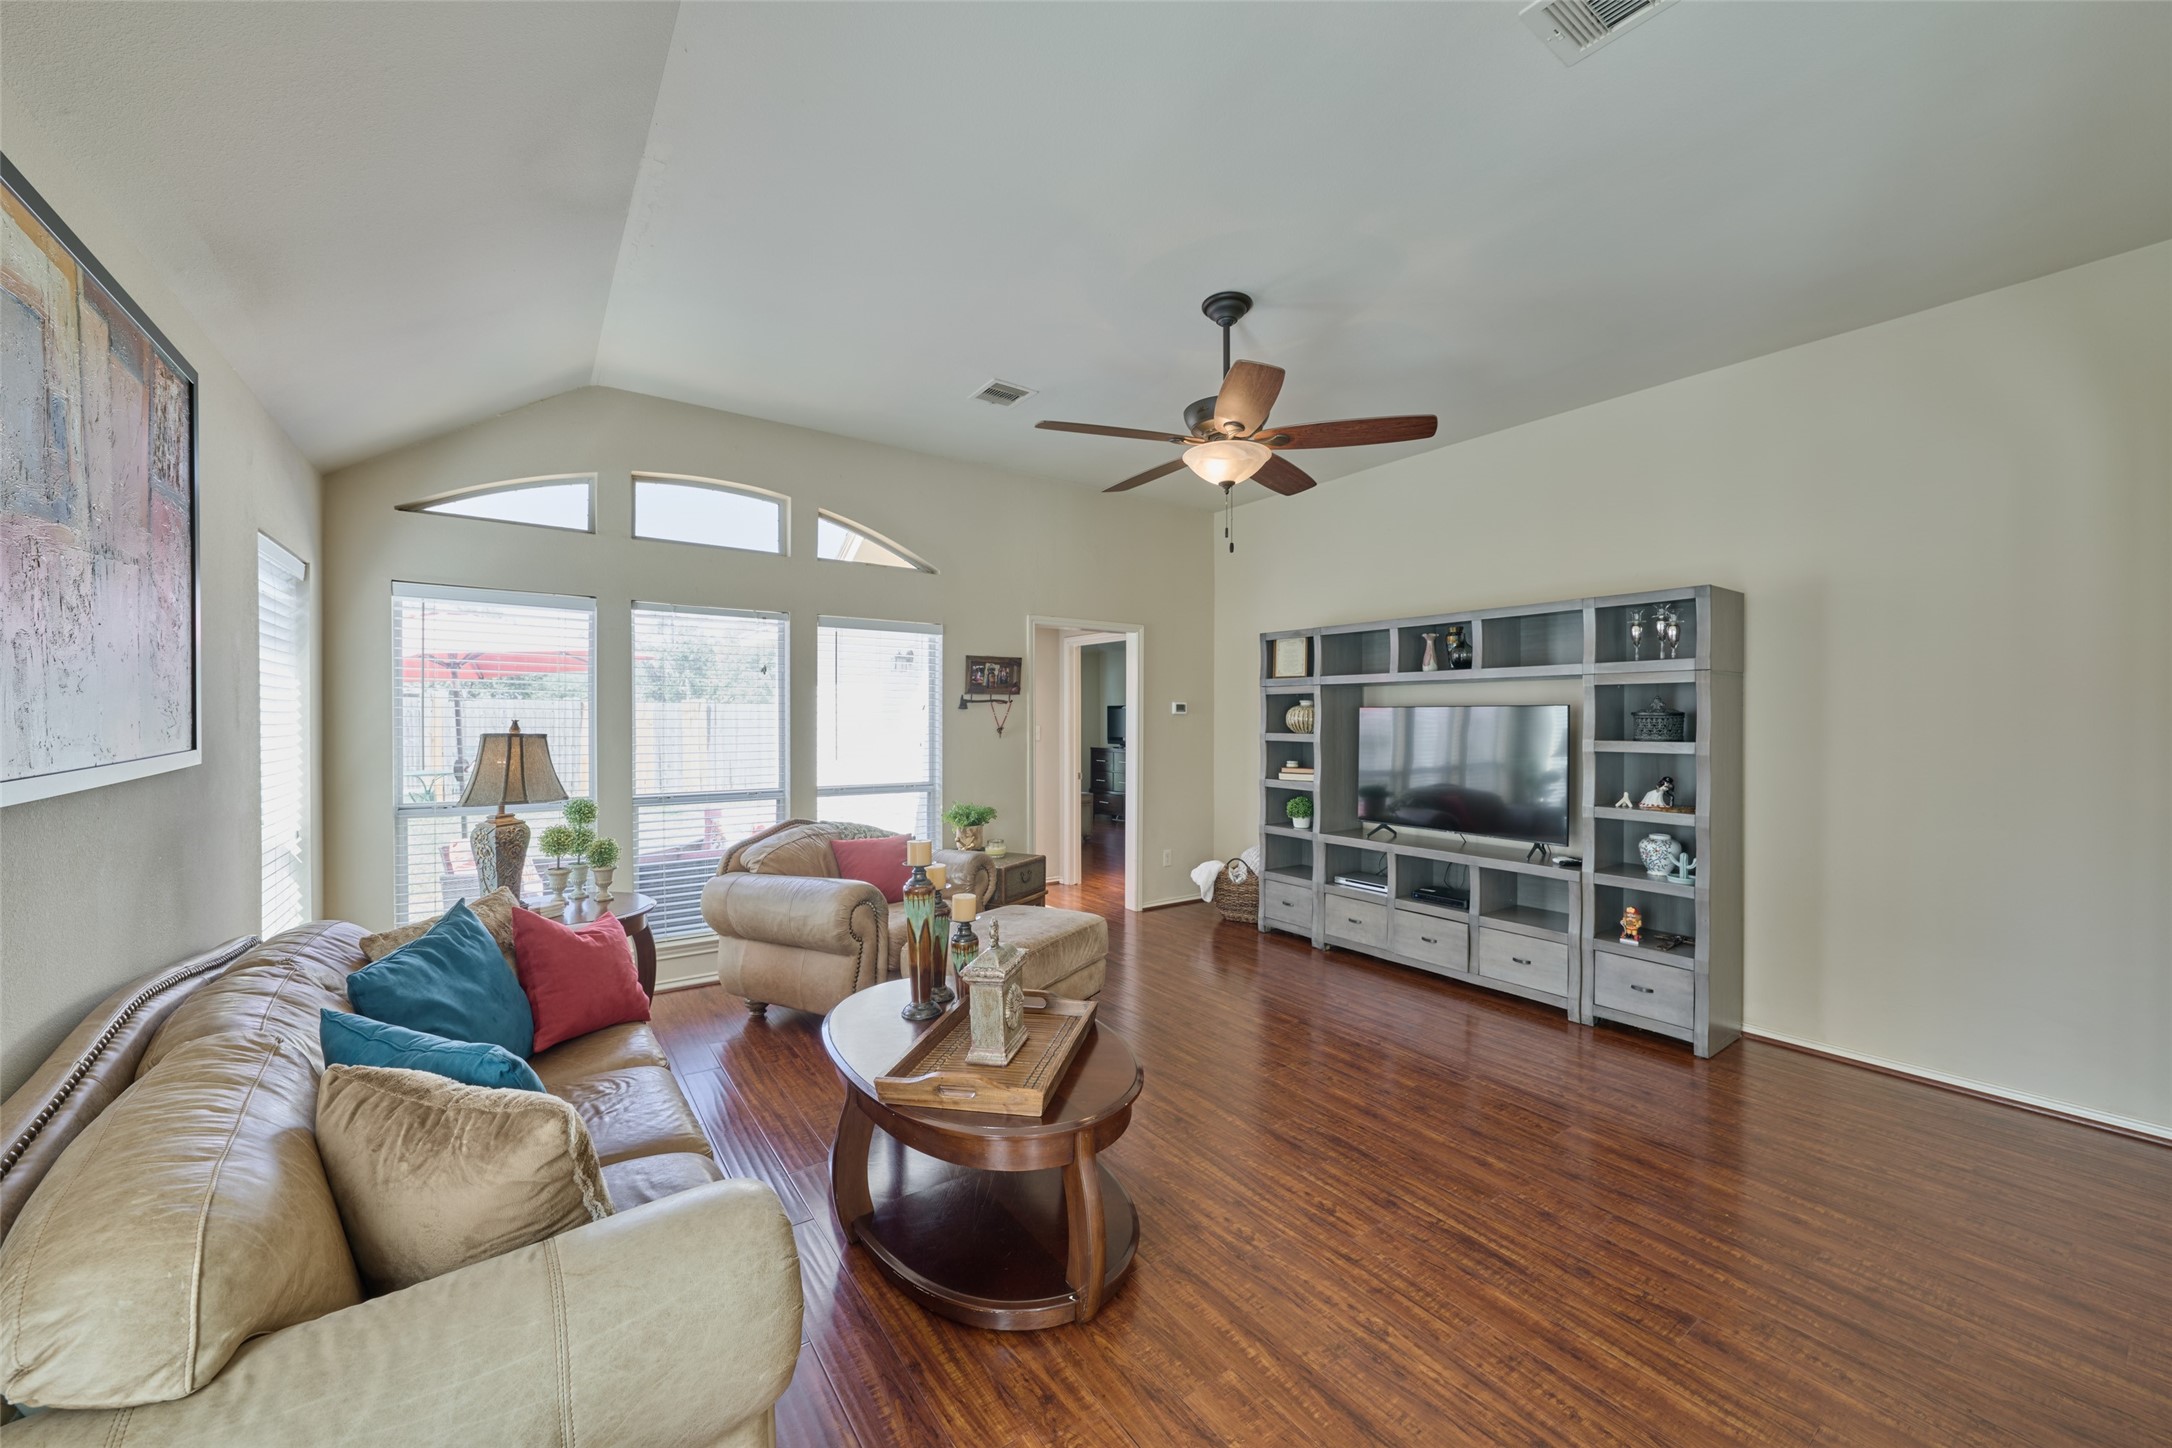 Family room is large and open with a wall of windows providing views to the backyard and greenspace.